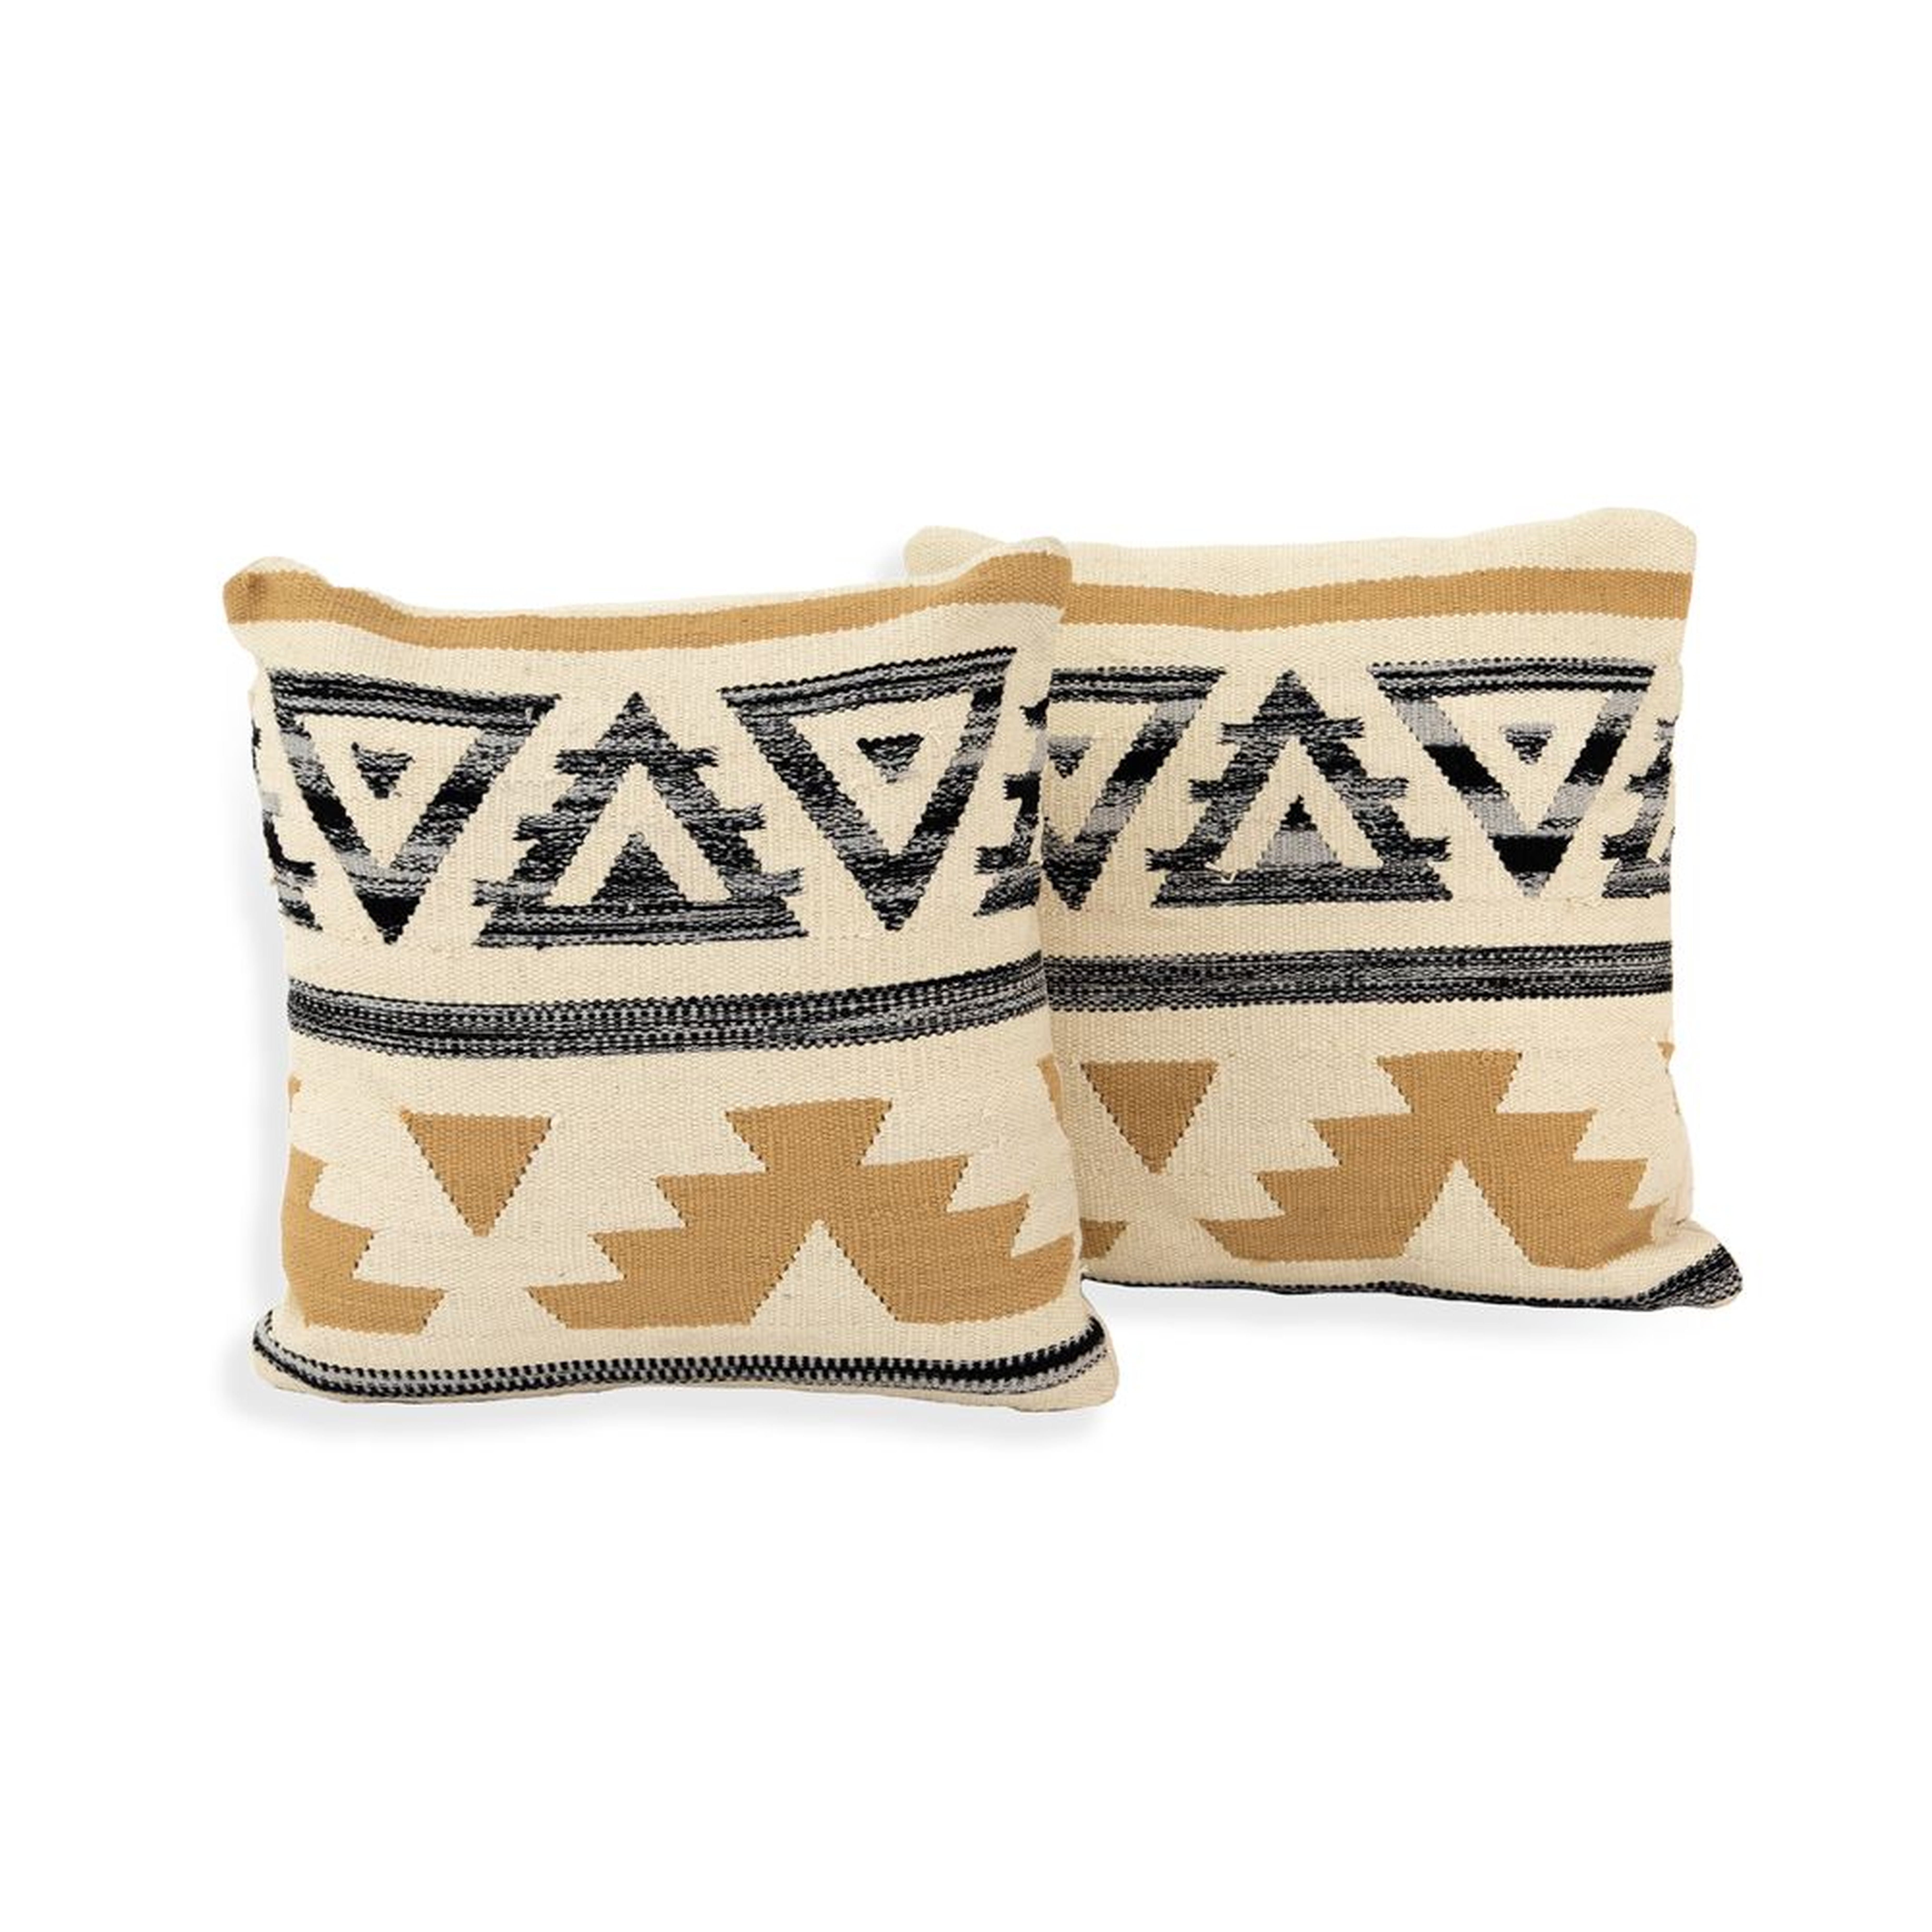 Cristobal Southwestern Pillows 20", Set of 2 - Crate and Barrel